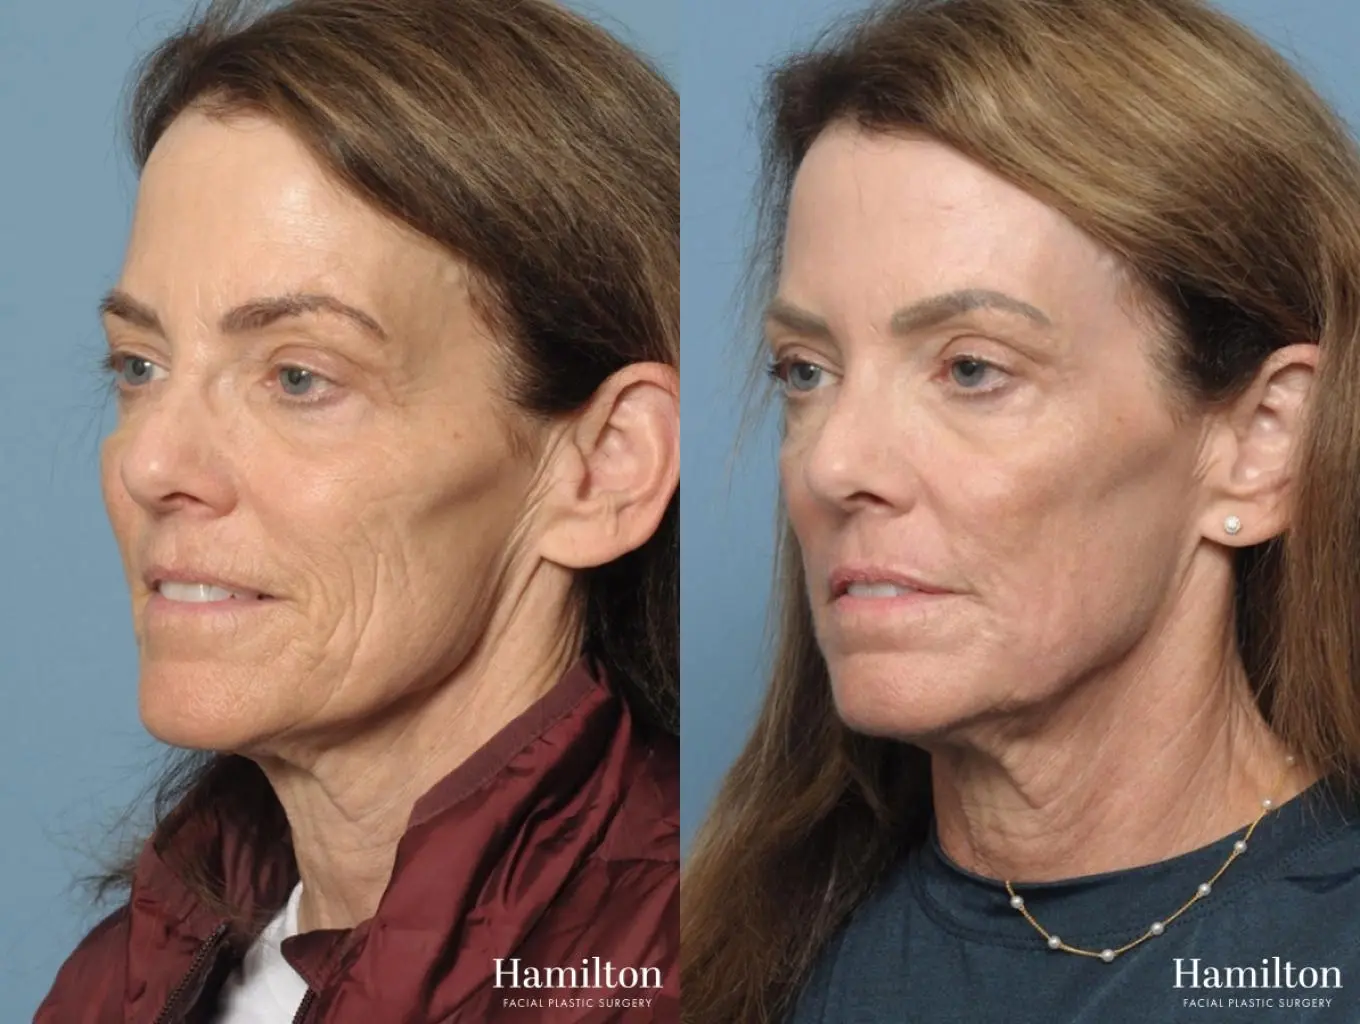 C02 Laser: Patient 3 - Before and After 2